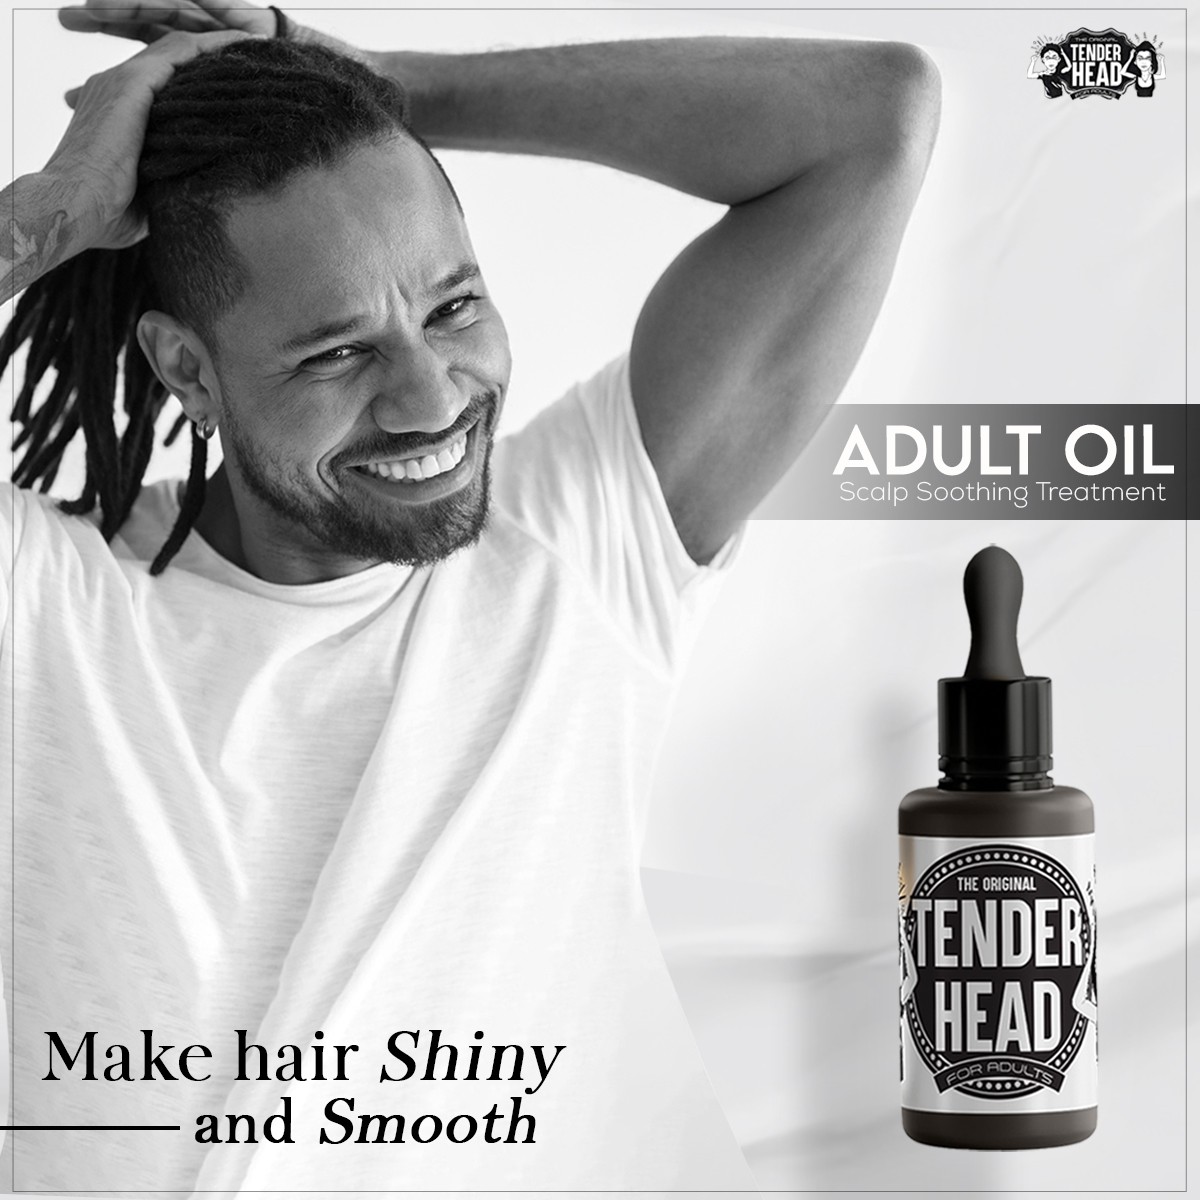 Give your hair the extra boost of nourishment and shine your way out through the crowd while speaking volume with your look. Shop today with Tender Head LLC!
.
#hairgrowth #naturalhairrocks #hairlosssolutions #dropfade #AfricanAmericans #blackmenwithstyle #blackmenshair #blackmen